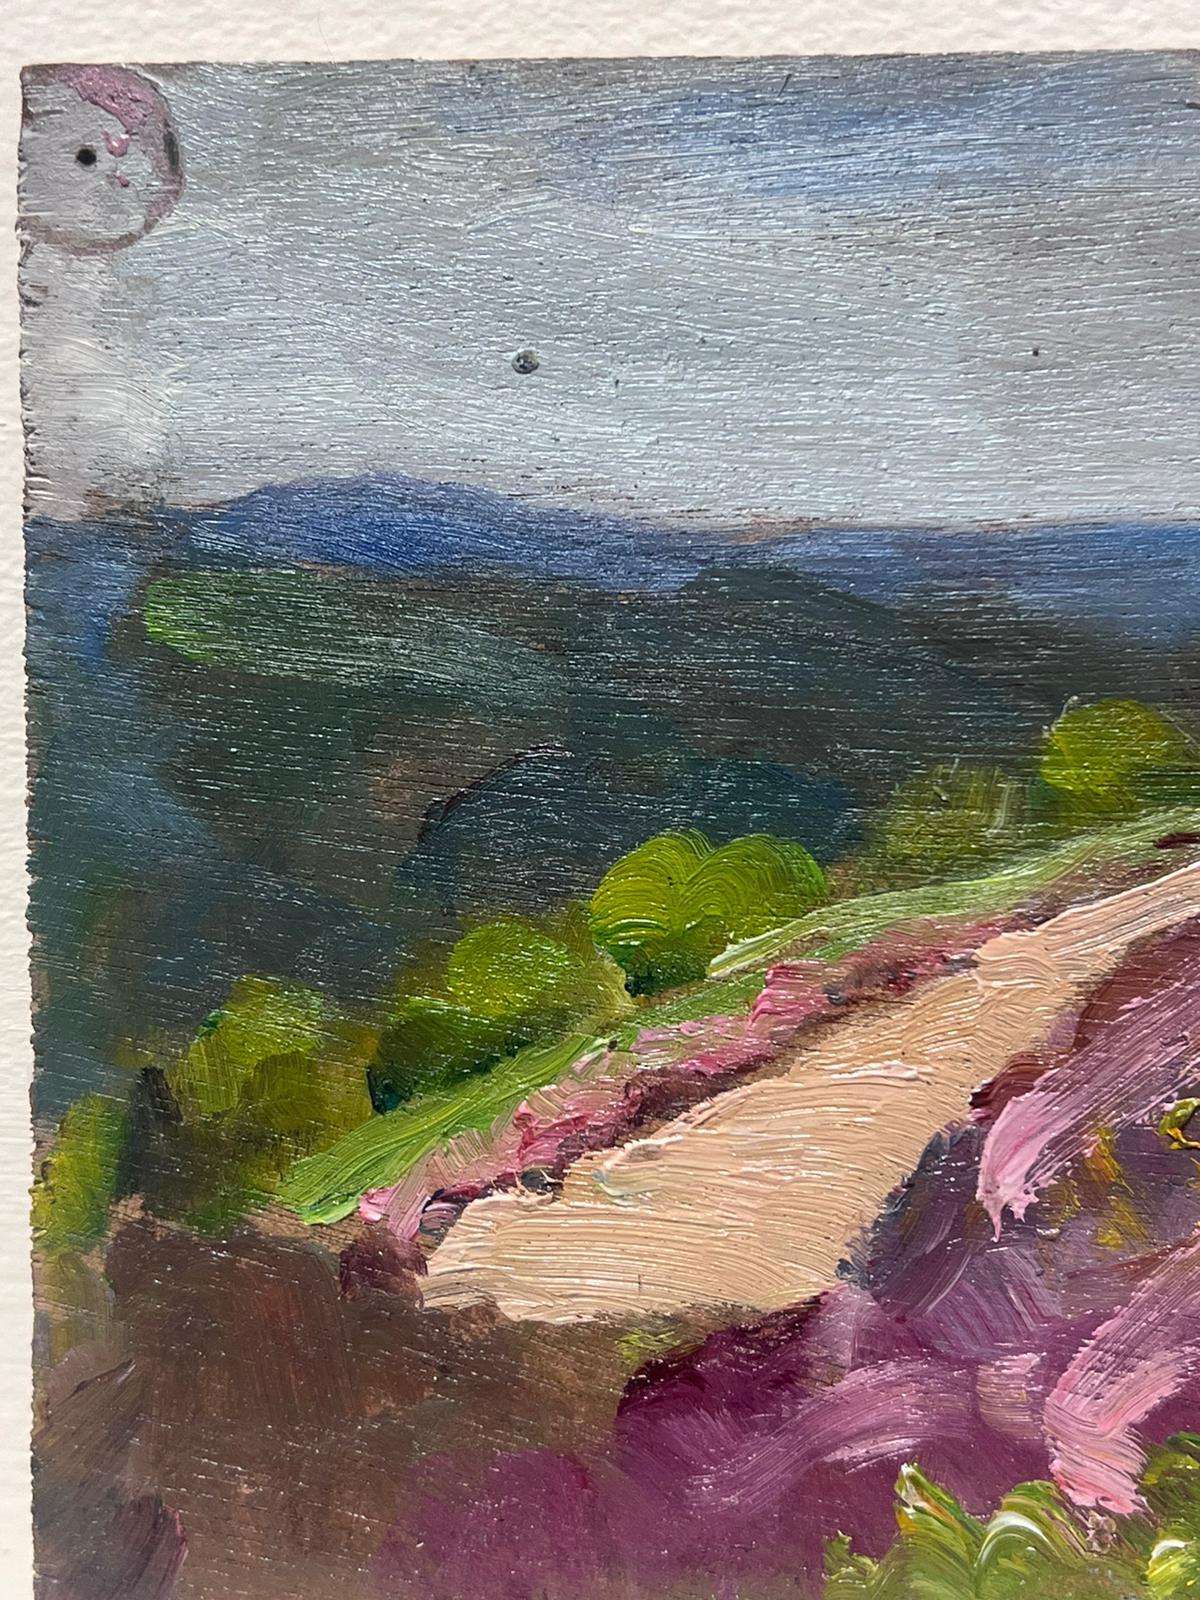 Purple and Green Landscape
by Louise Alix (French, 1888-1980) *see notes below
provenance stamp to the back 
oil painting on board, unframed
measures: 5.5 high by 7 inches wide
condition: overall very good and sound, a few scuffs and marks to the